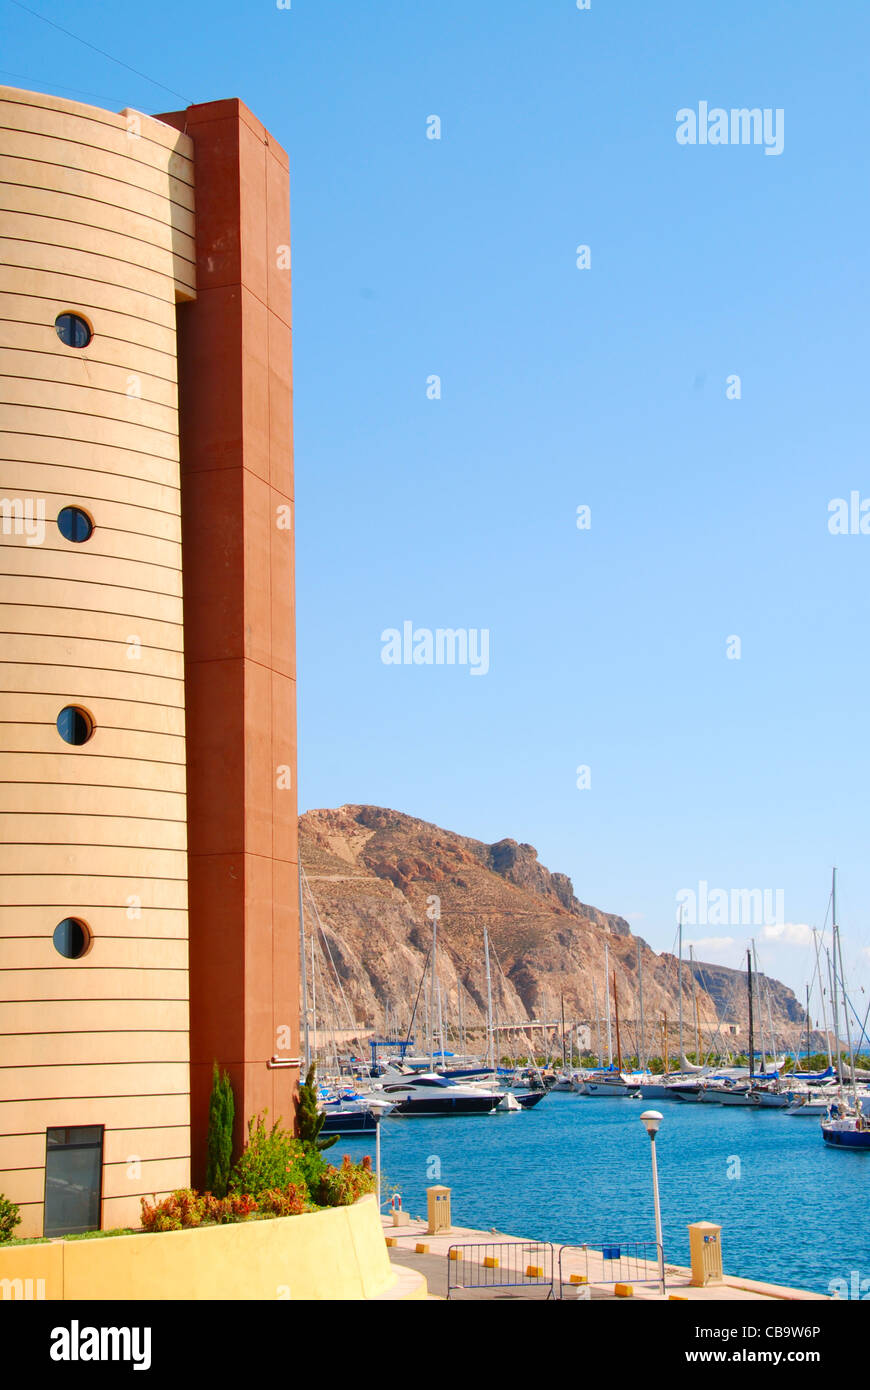 The control tower of Aguadulce Harbour, with the mountains in the background, on a typically beautiful Andalucian day. Stock Photo